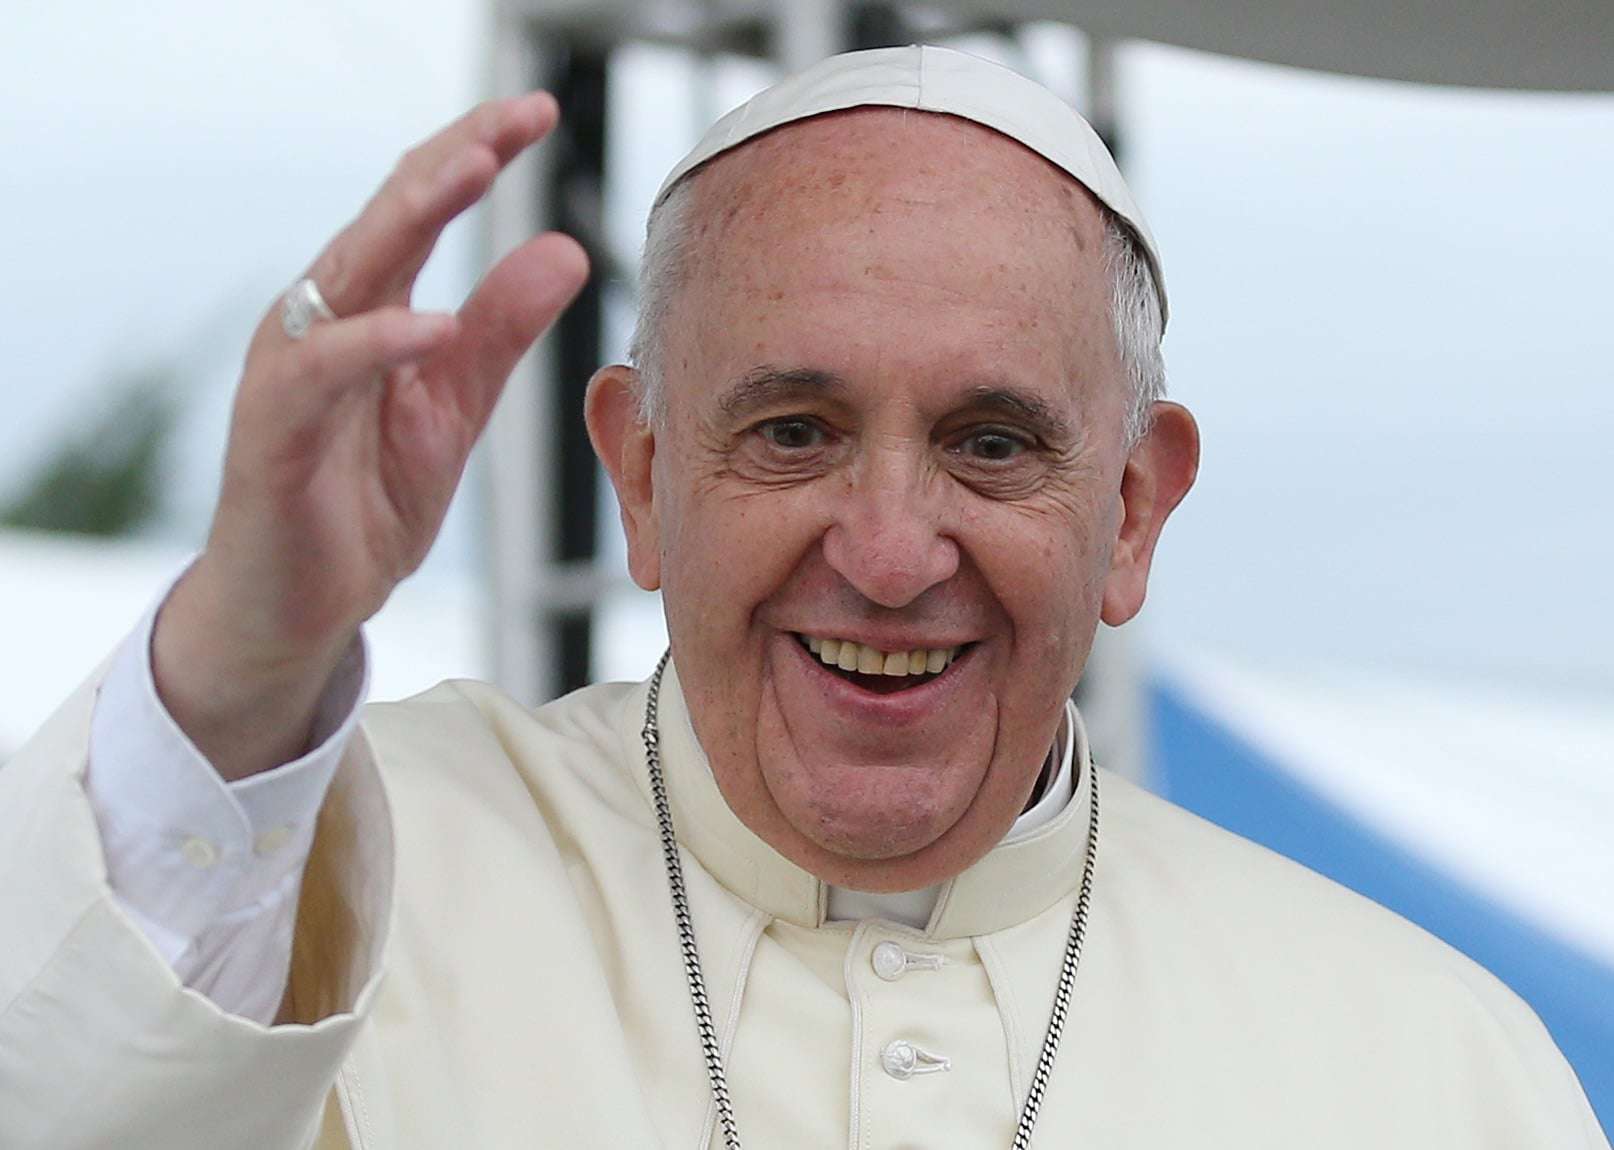 Francis is the third of the three modern popes to shape catholic social teaching.